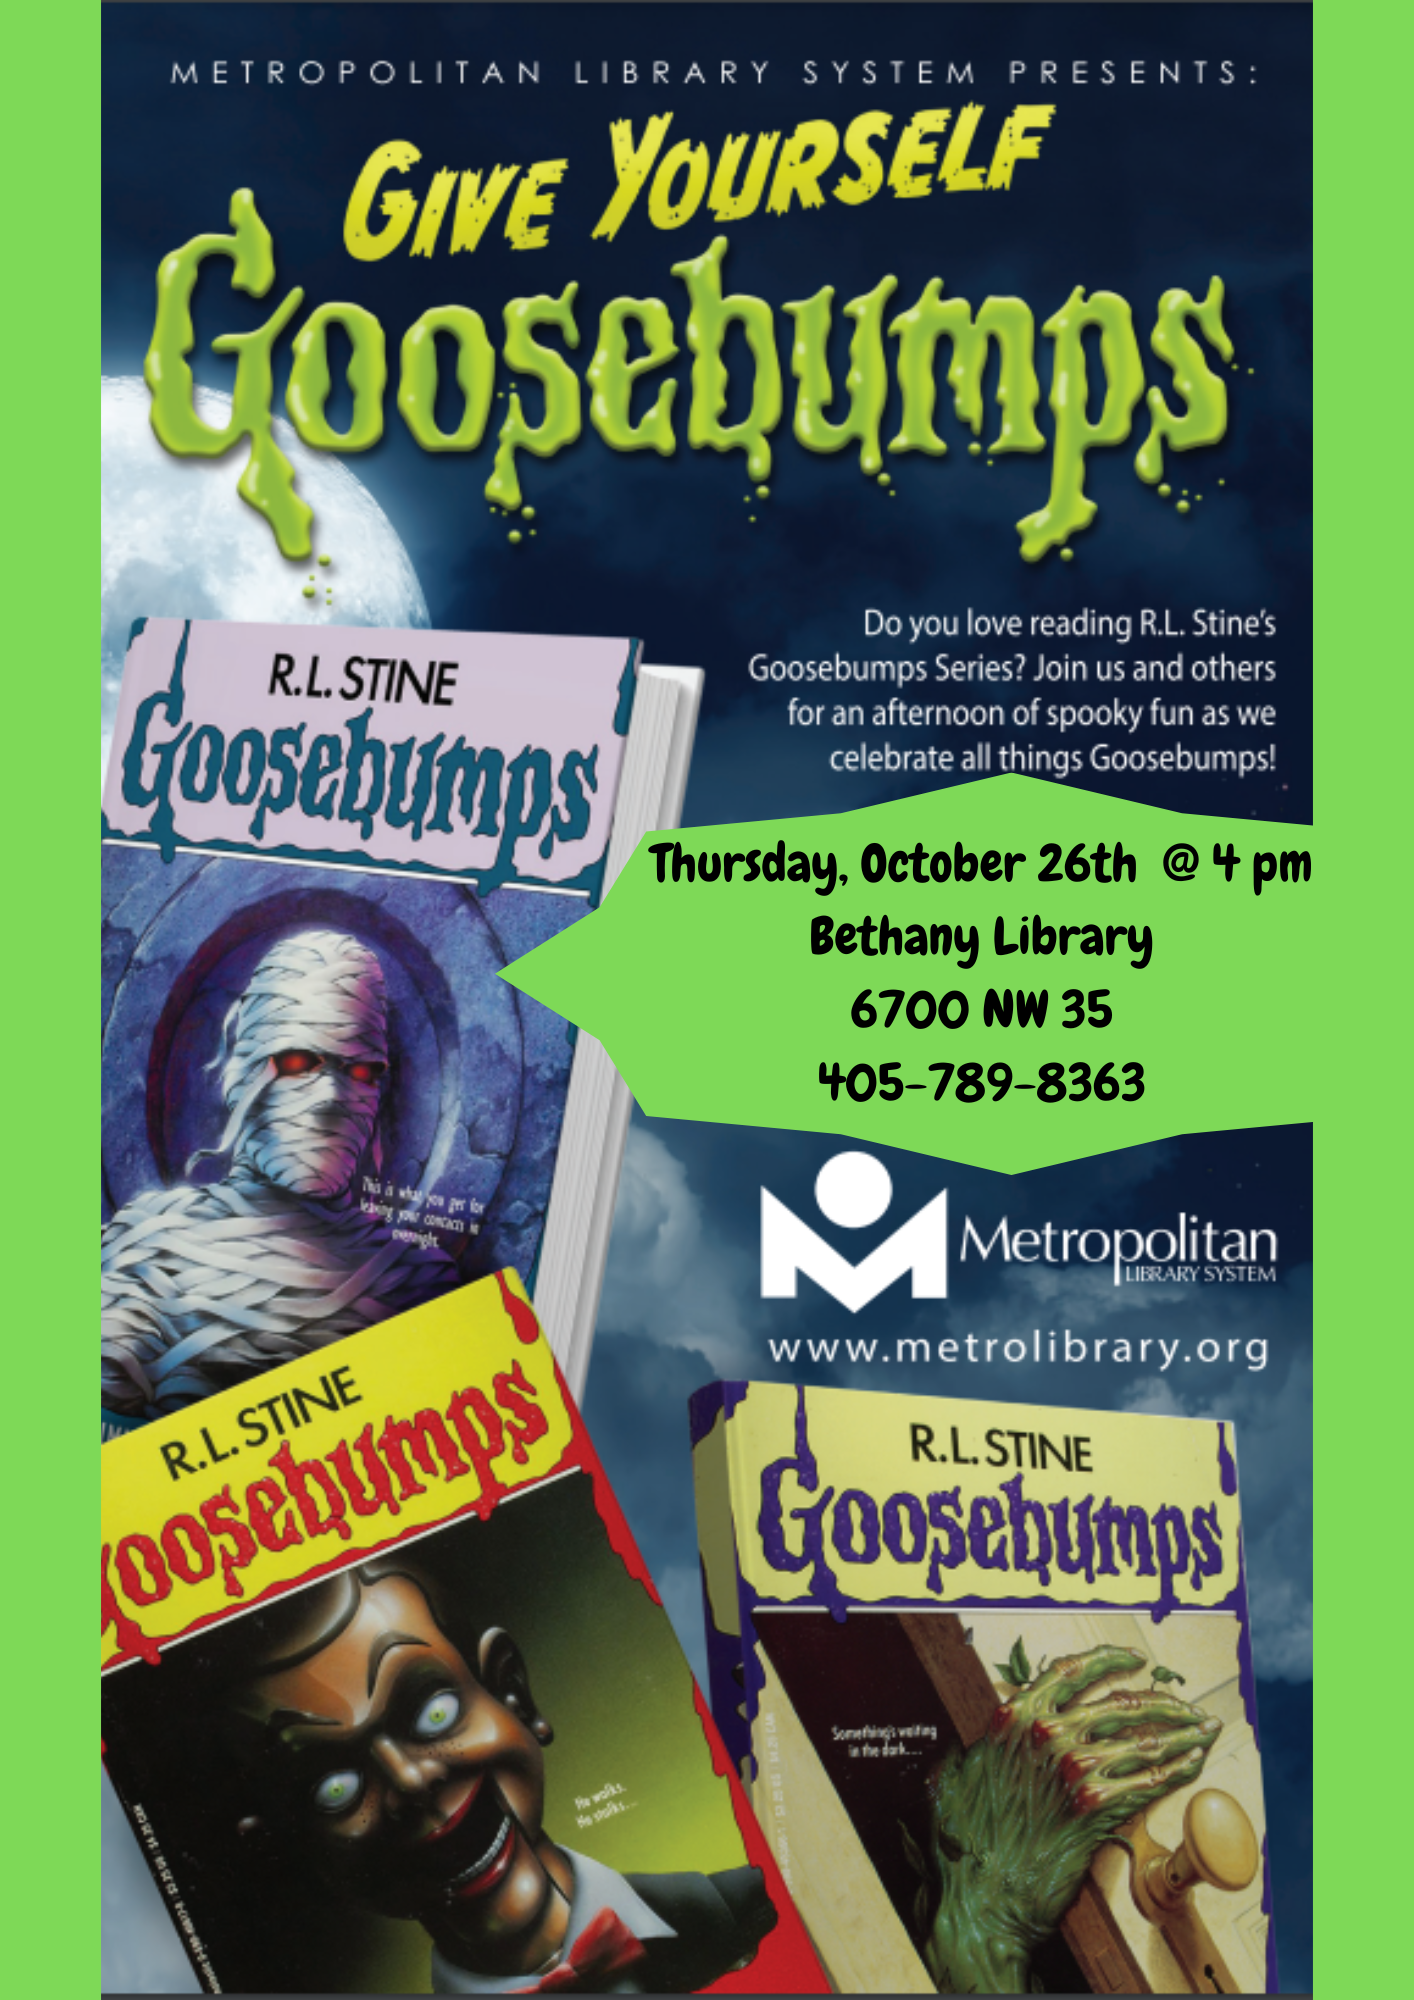 Shows Various Goosebumps Book Covers (Featuring a Dummy, Mummy, Monster)